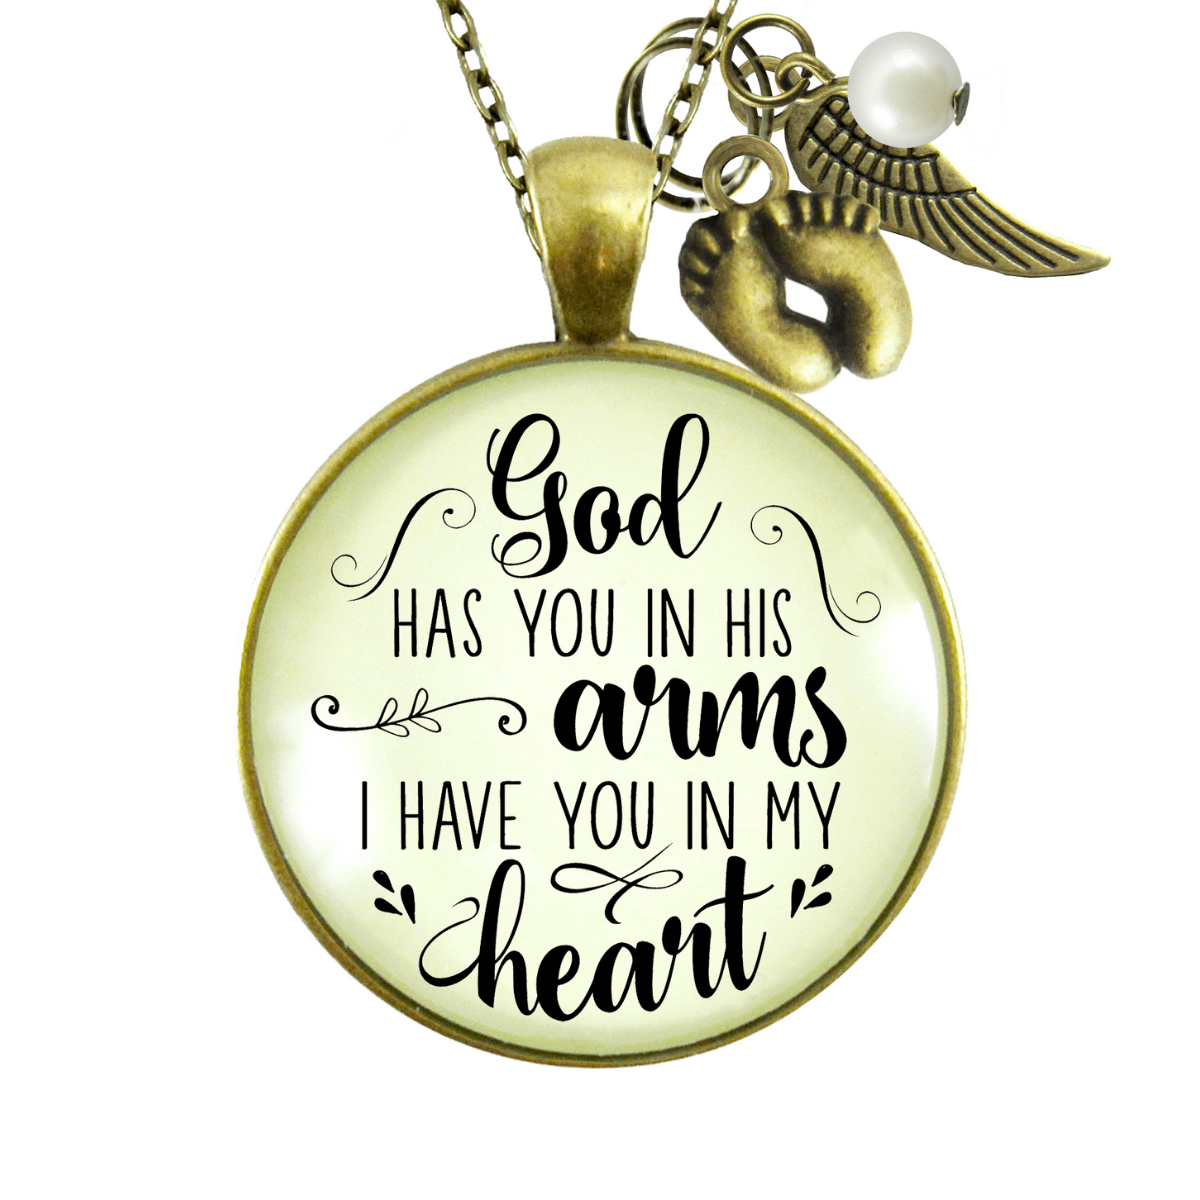 Gutsy Goodness Baby Loss Memorial Necklace For Mom God Has You Arms Miscarriage Jewelry Gift - Gutsy Goodness;Baby Loss Memorial Necklace For Mom God Has You Arms Miscarriage Jewelry Gift - Gutsy Goodness Handmade Jewelry Gifts